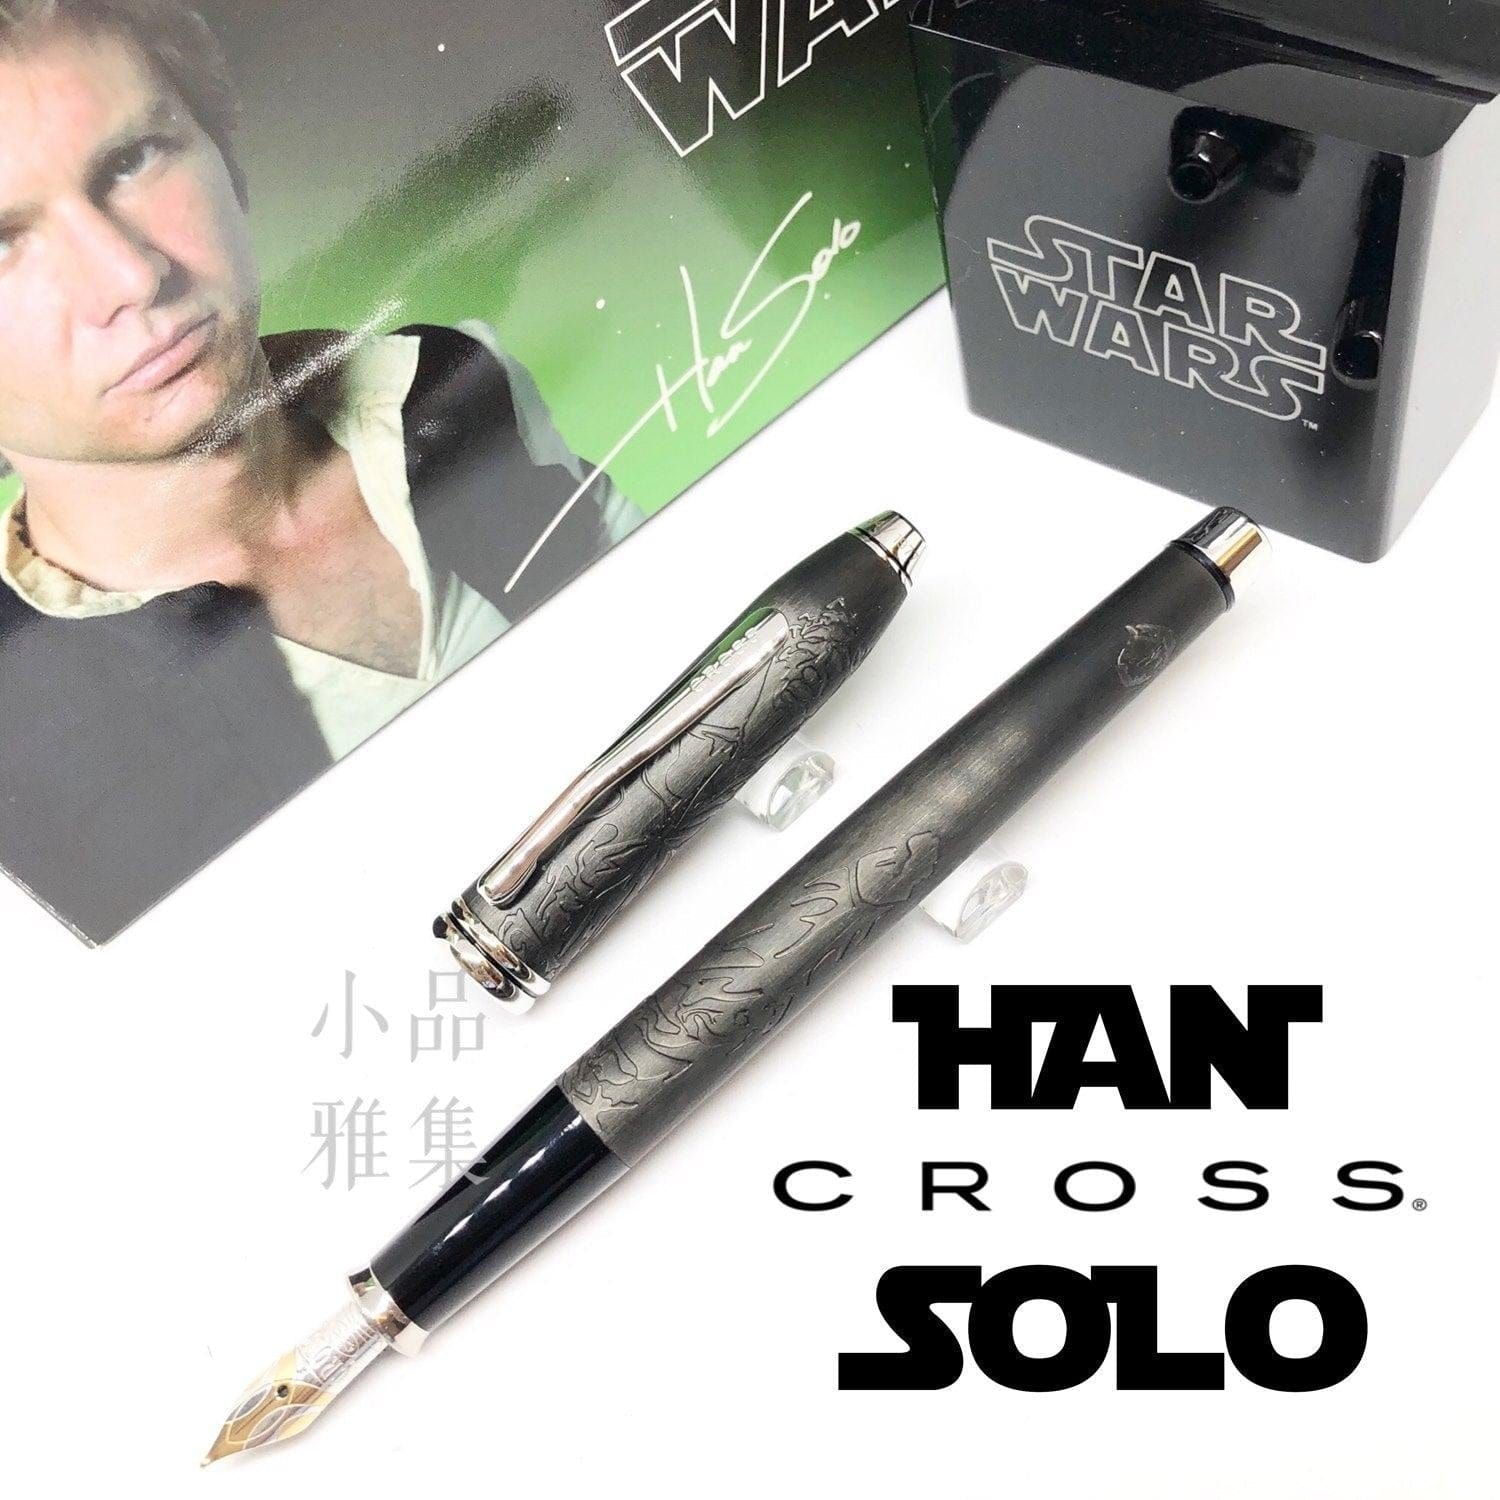 Limited Edition Cross Star Wars Pens: These Are The Pens You're